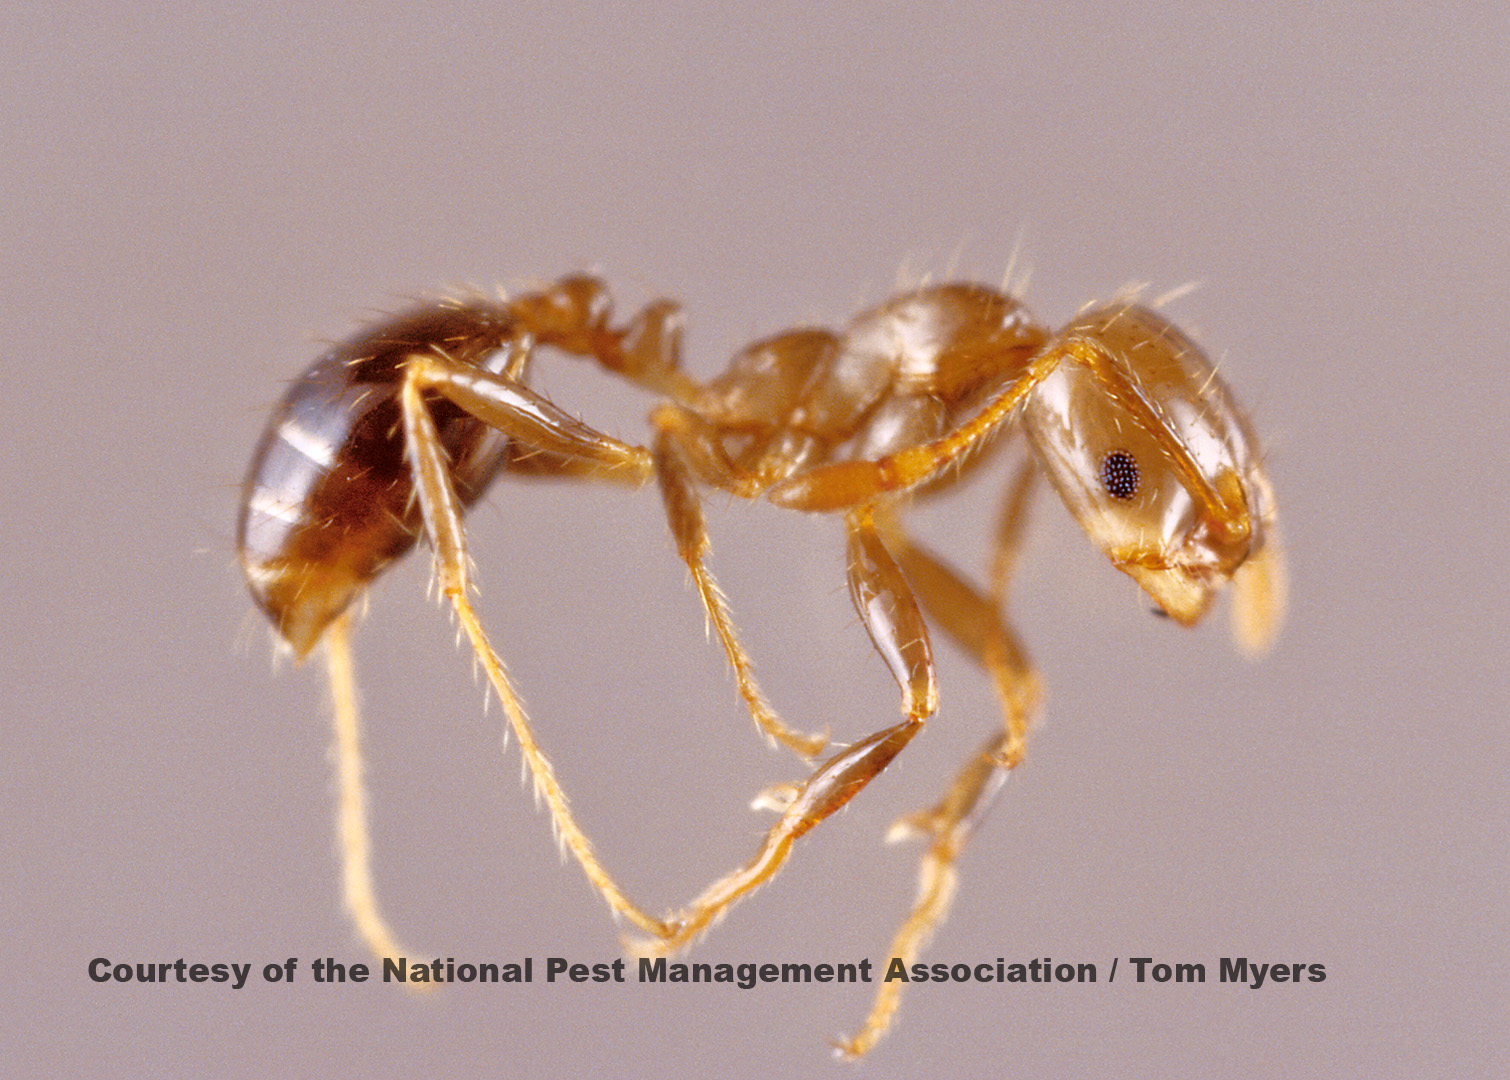 Red Imported Fire Ant Information - Fun Ant Facts from PestWorld for Kids